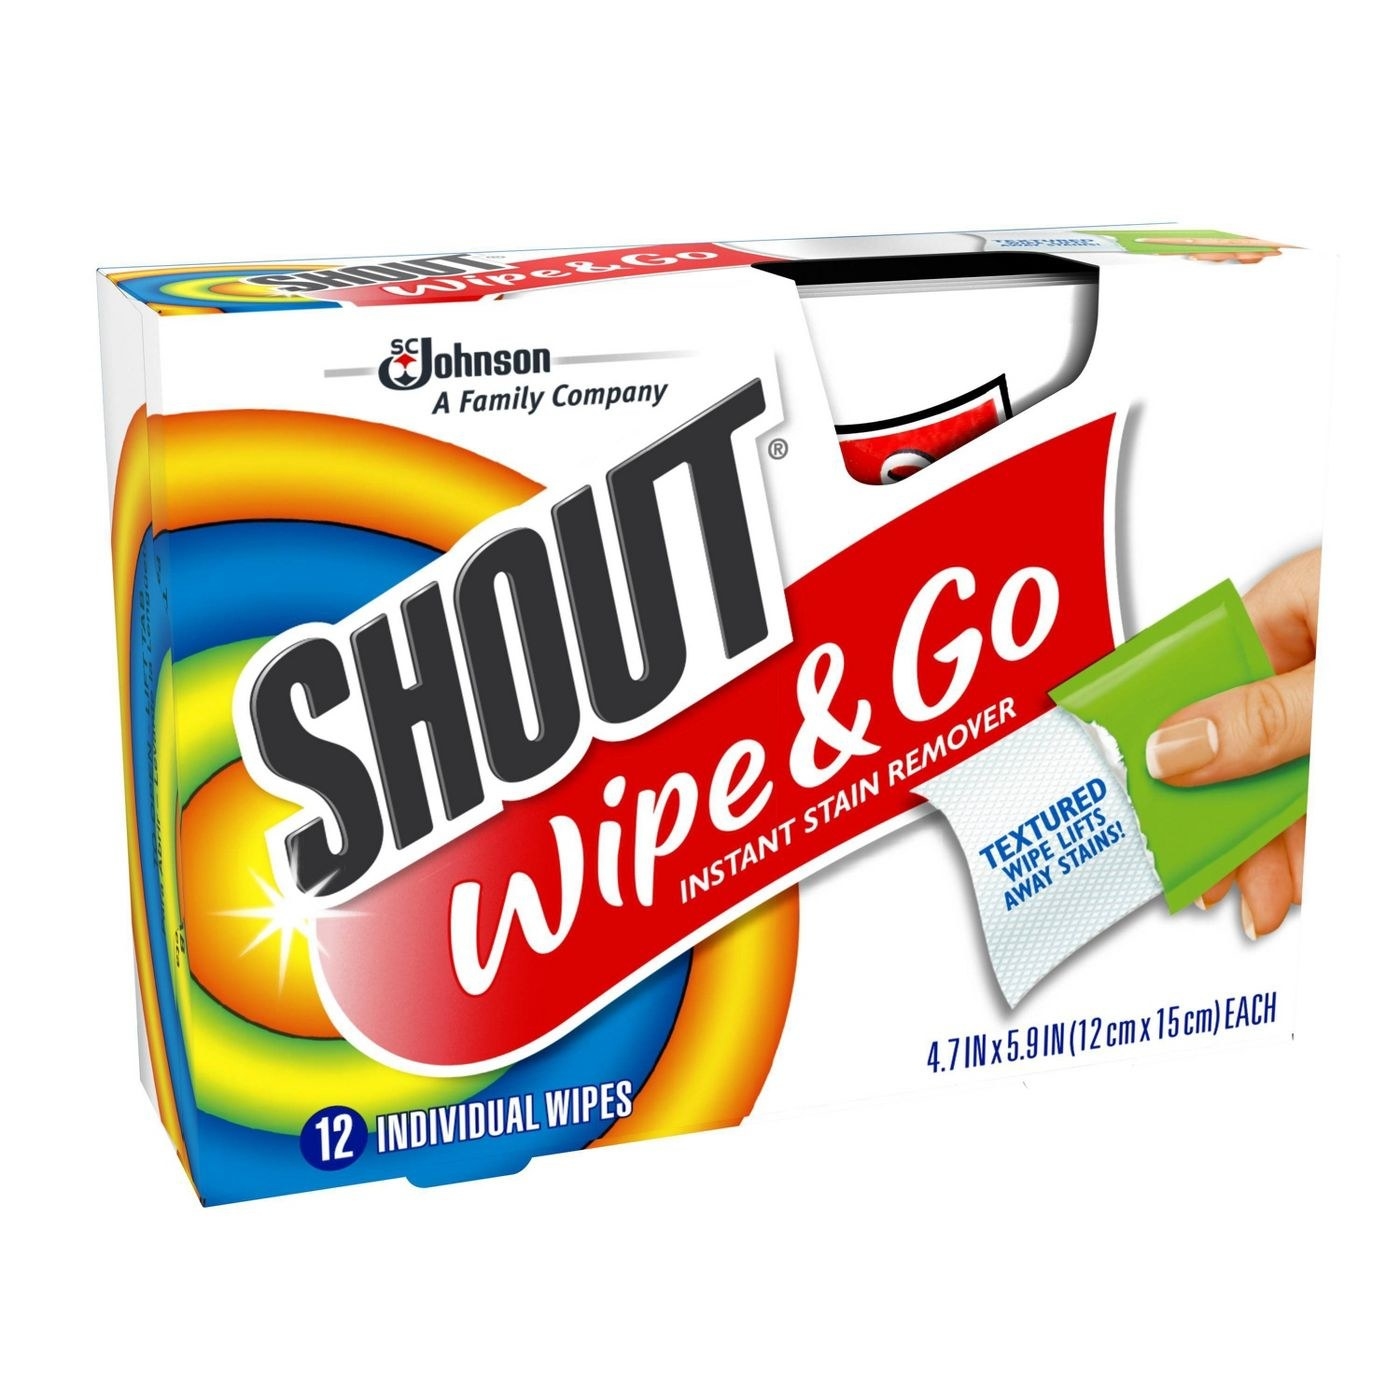 The wipe &amp;amp; go instant stain remover